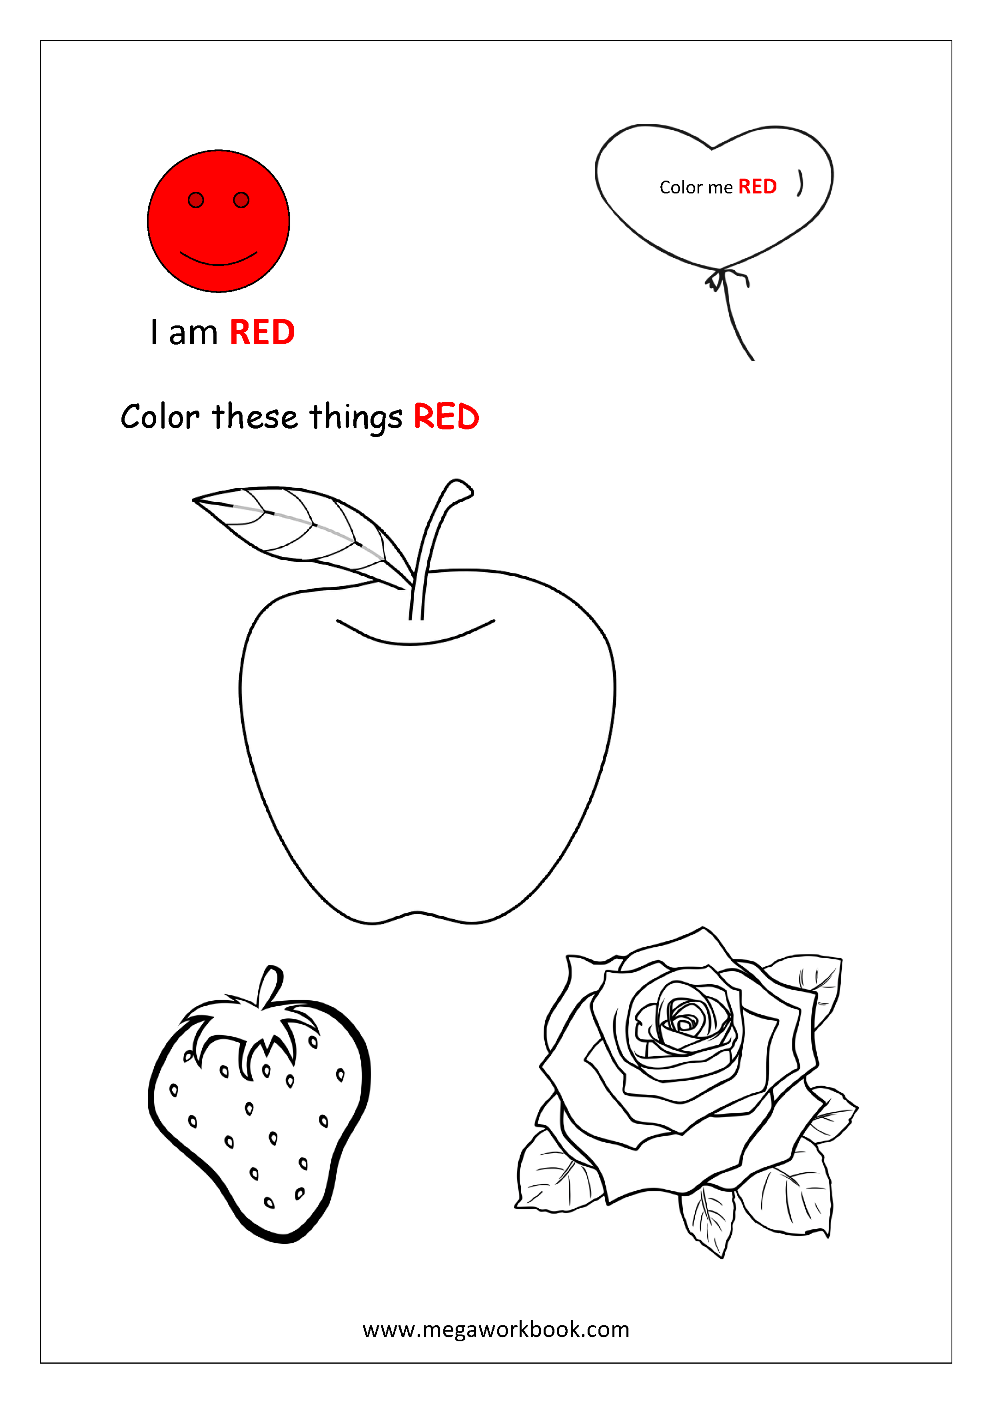 red objects coloring pages